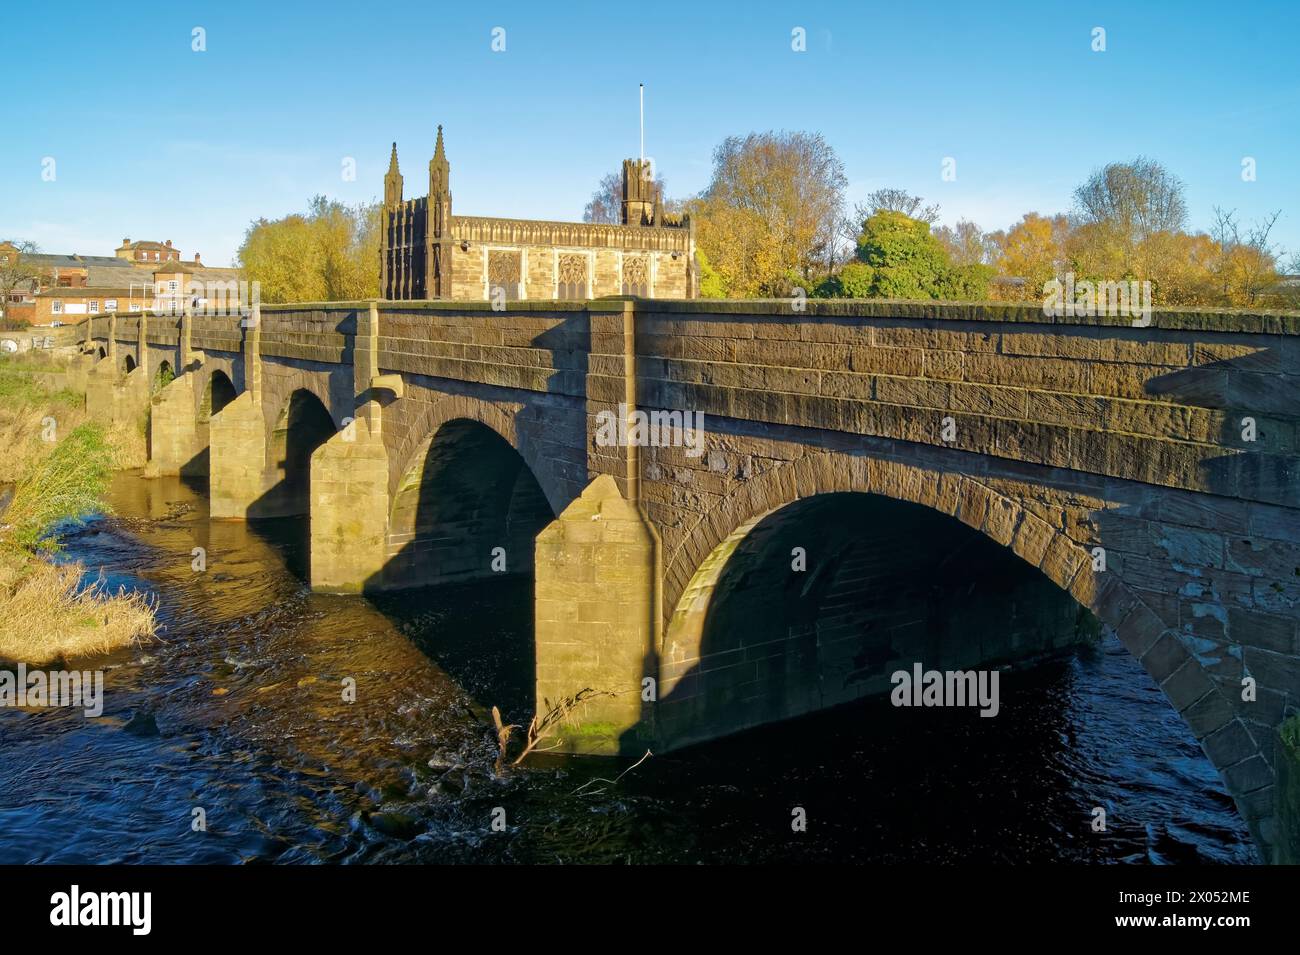 UK, West Yorkshire, Wakefield, Chantry Chapel of St Mary the Virgin & the Medieval Bridge over the River Calder Stock Photo